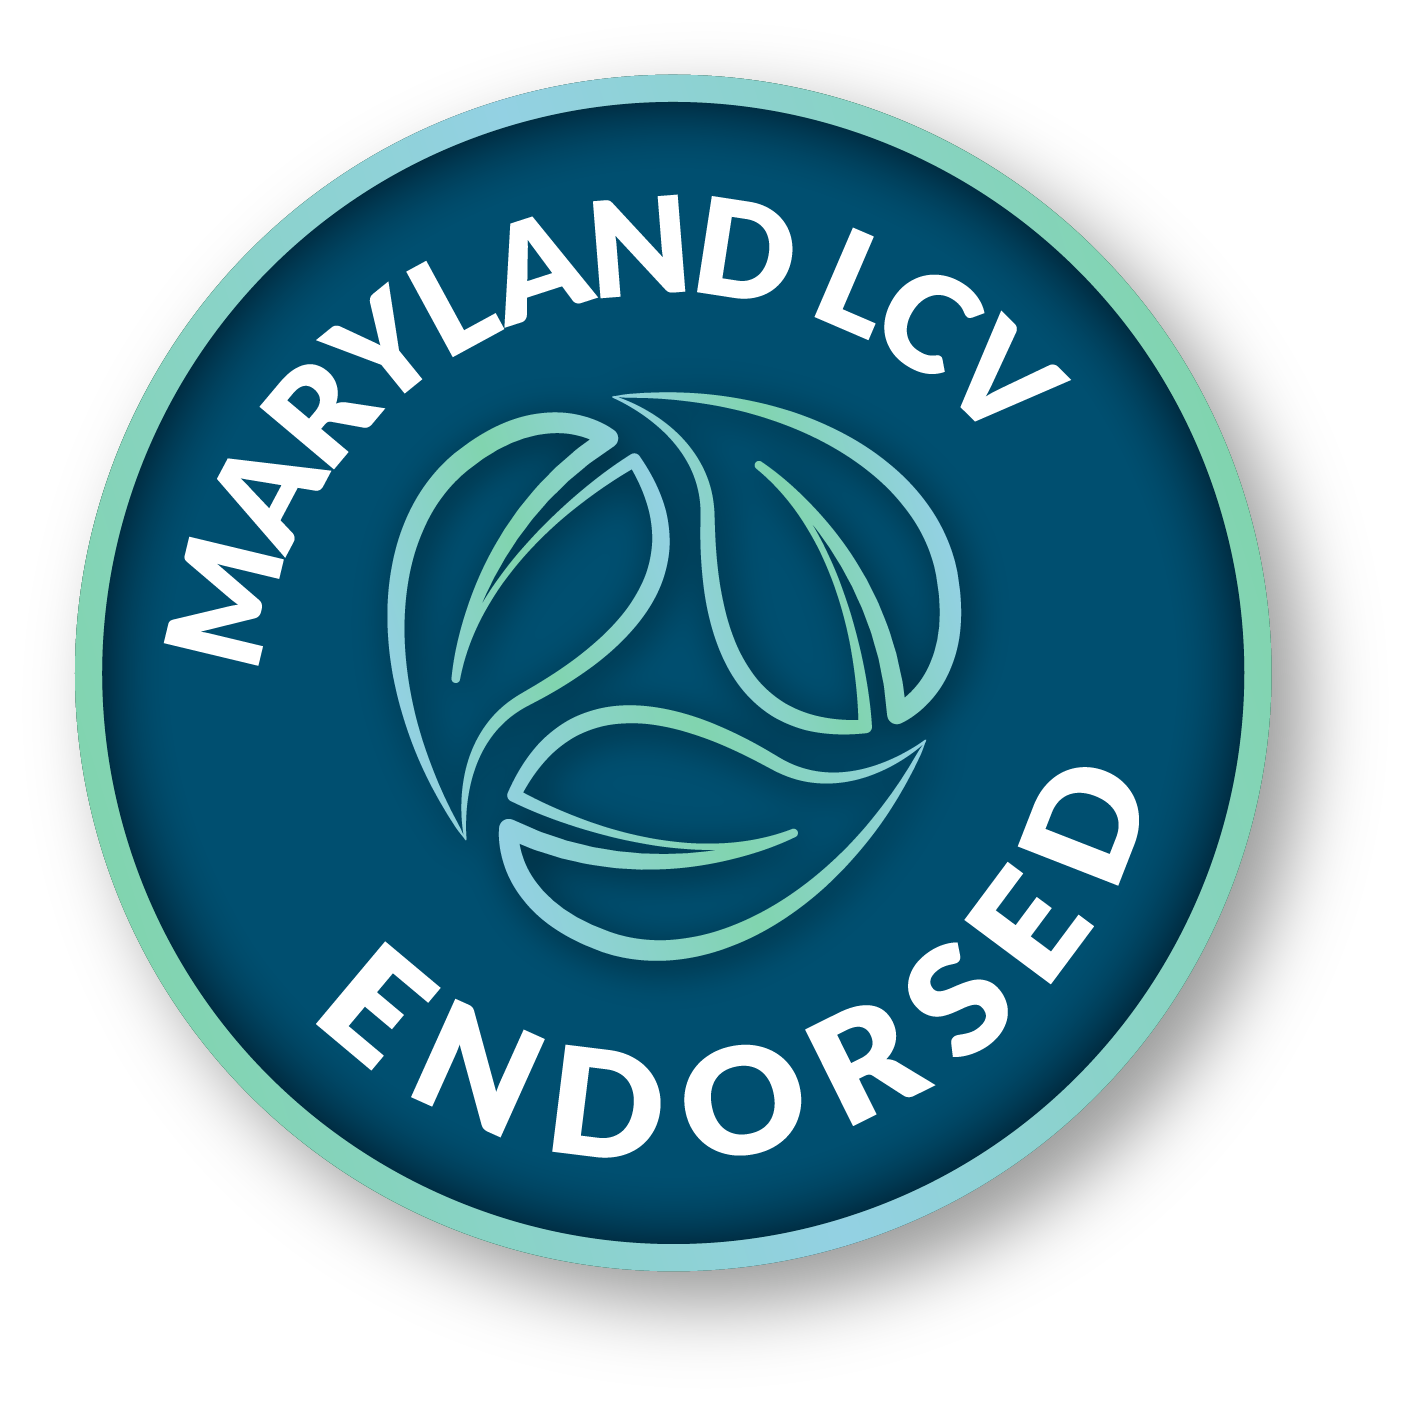 Maryland League of Conservation Voters